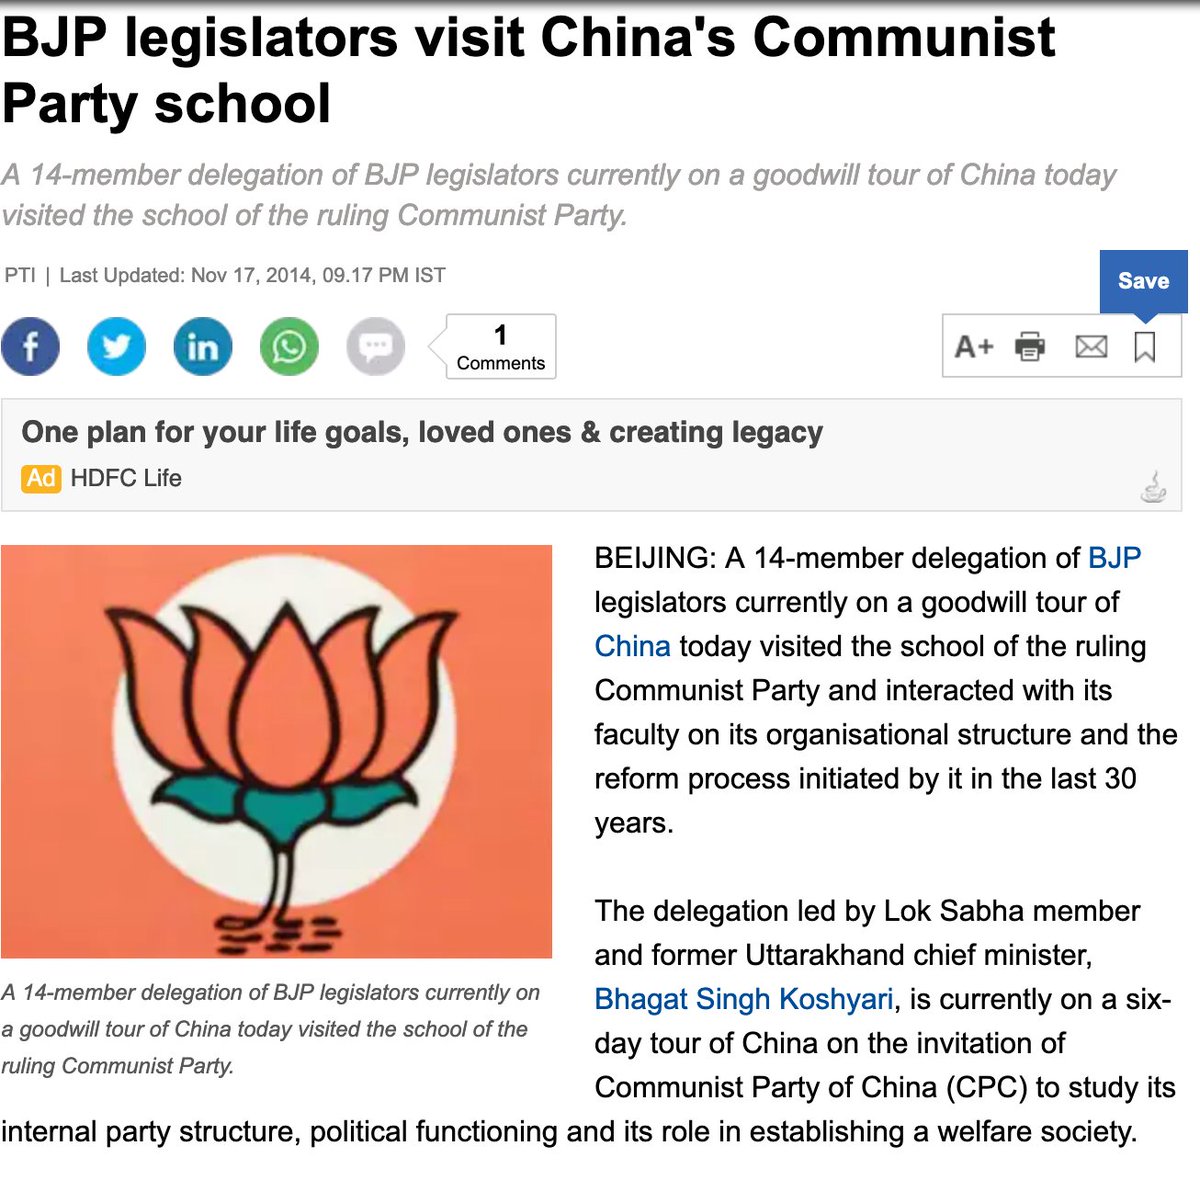 𝐓𝐡𝐫𝐞𝐚𝐝 𝐀𝐥𝐞𝐫𝐭.We all know about the Bonhomie between Narendra Modi and Xi Jinping, Lets now look at the connection betweenBharatiya Janta Party and Communist Party of China.In 2014, In a bid to build closer party-to-party links, China hosted one of the biggest..1/n